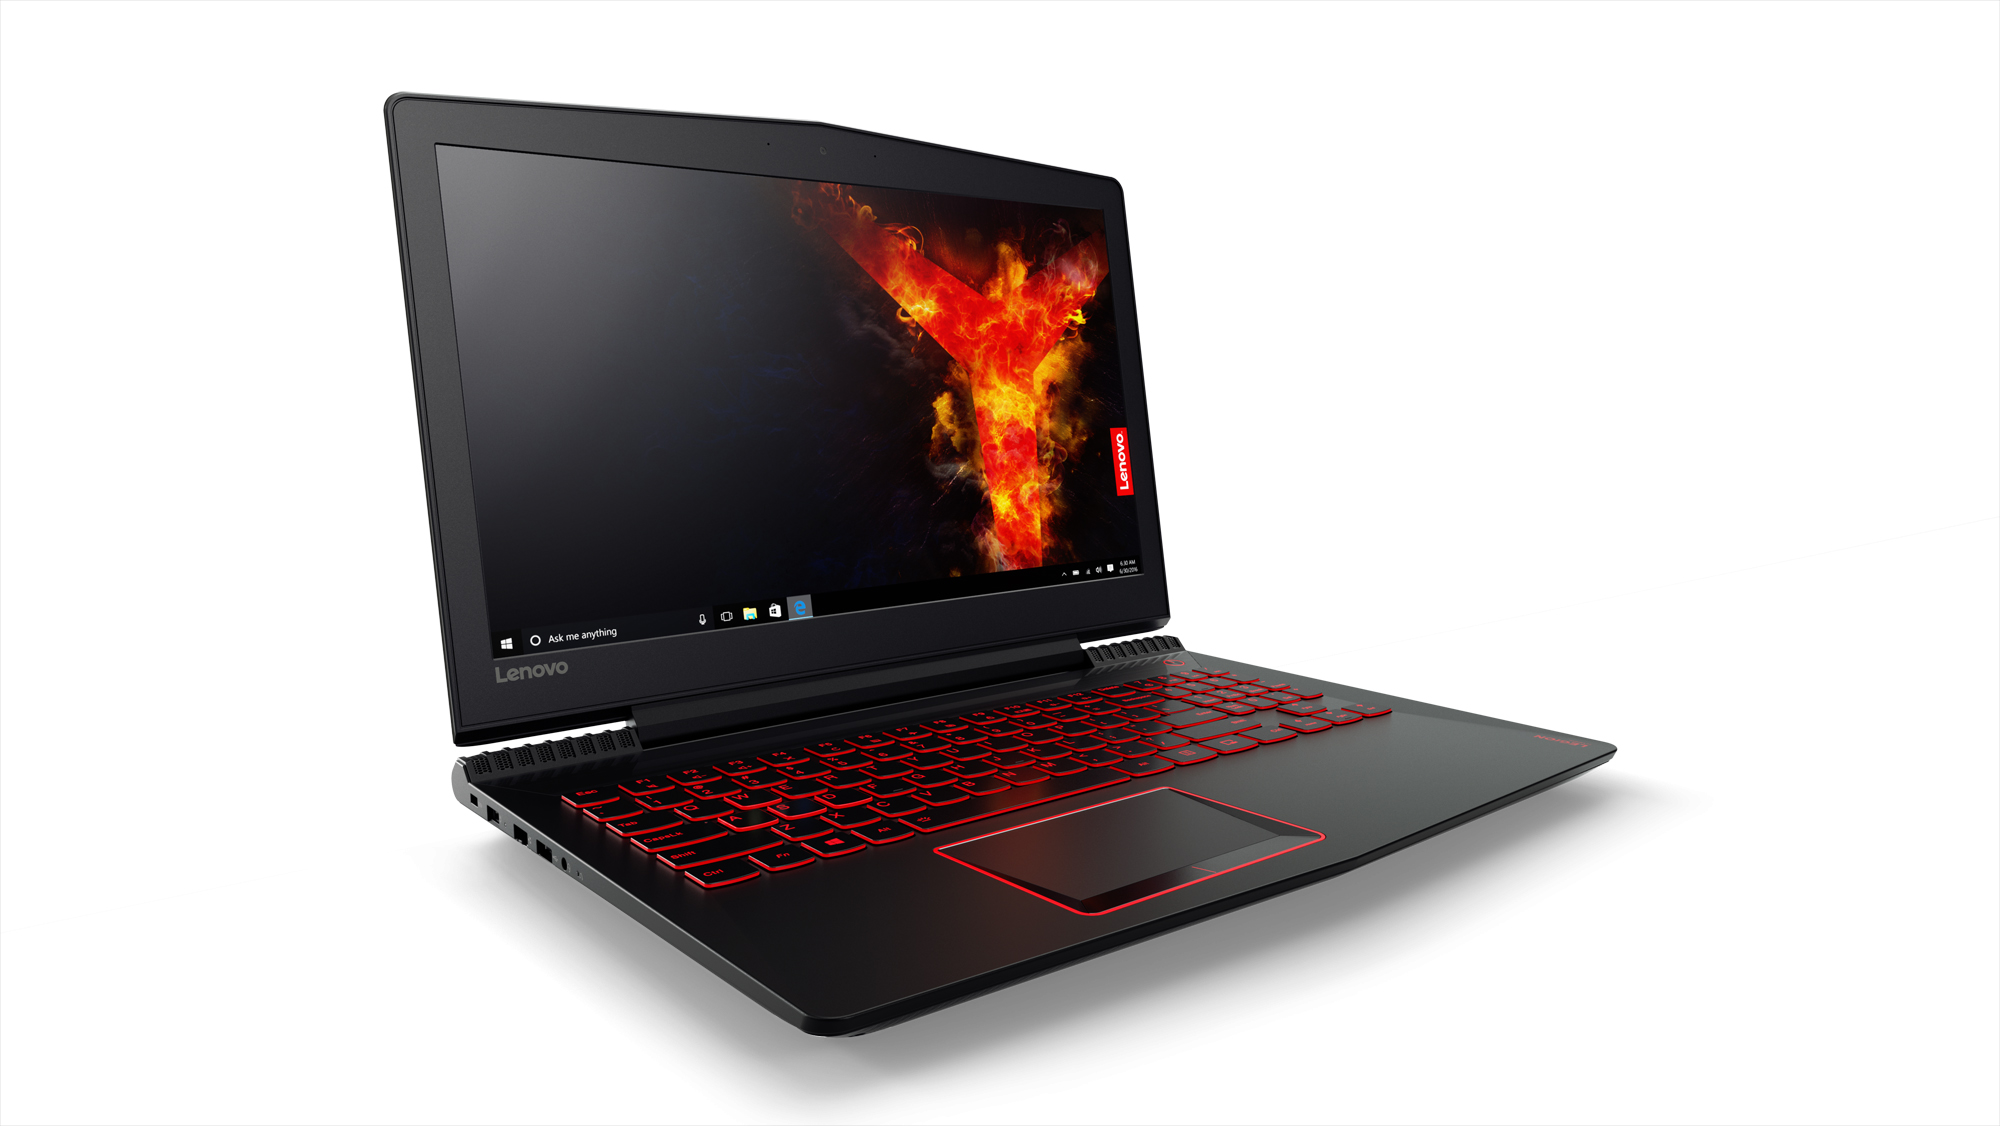 Lenovo Gaming Laptop 15.6", FHD Screen, Intel core i7-7700hq, 2.8-3.8 GHZ, Nvidia GeForce GTX 1050 Ti Graphic Card, 8GB DDR4 Memory, 1TB HDD, 80WK00T2US - image 3 of 17